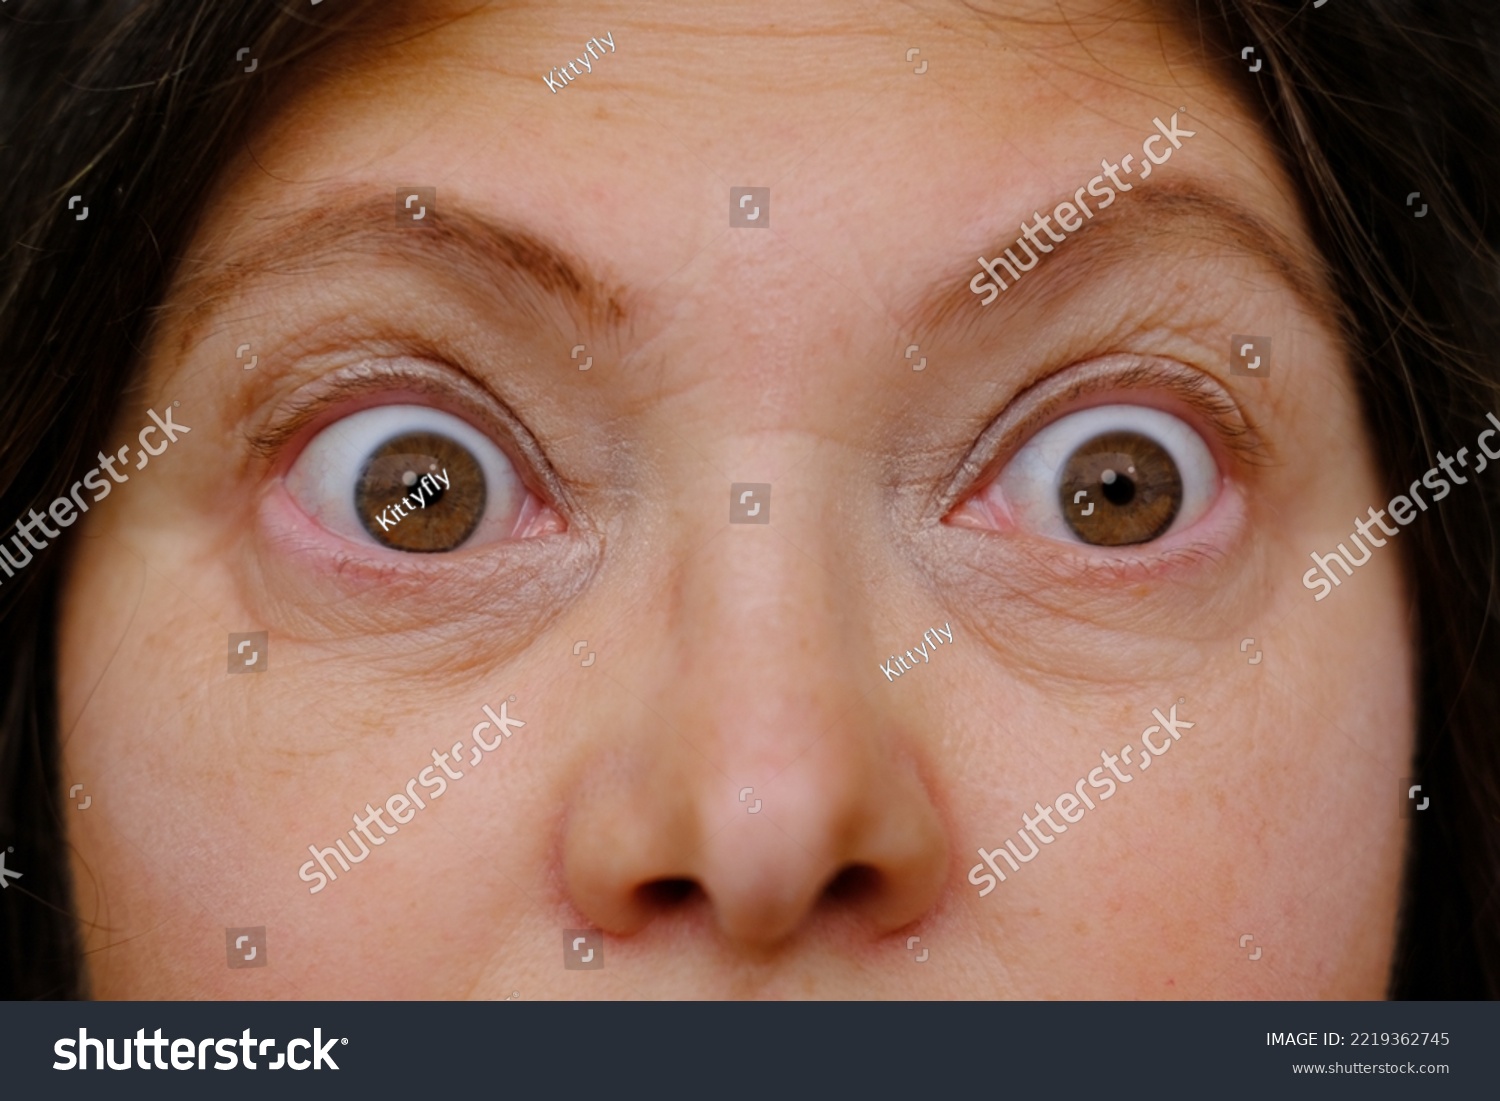 middle-aged mature woman with bulging eyes, upper face close-up, goggle eyes in fright, staring at camera, Very strong surprise or fright, horror in look, concept of cosmetic anti-aging procedures #2219362745